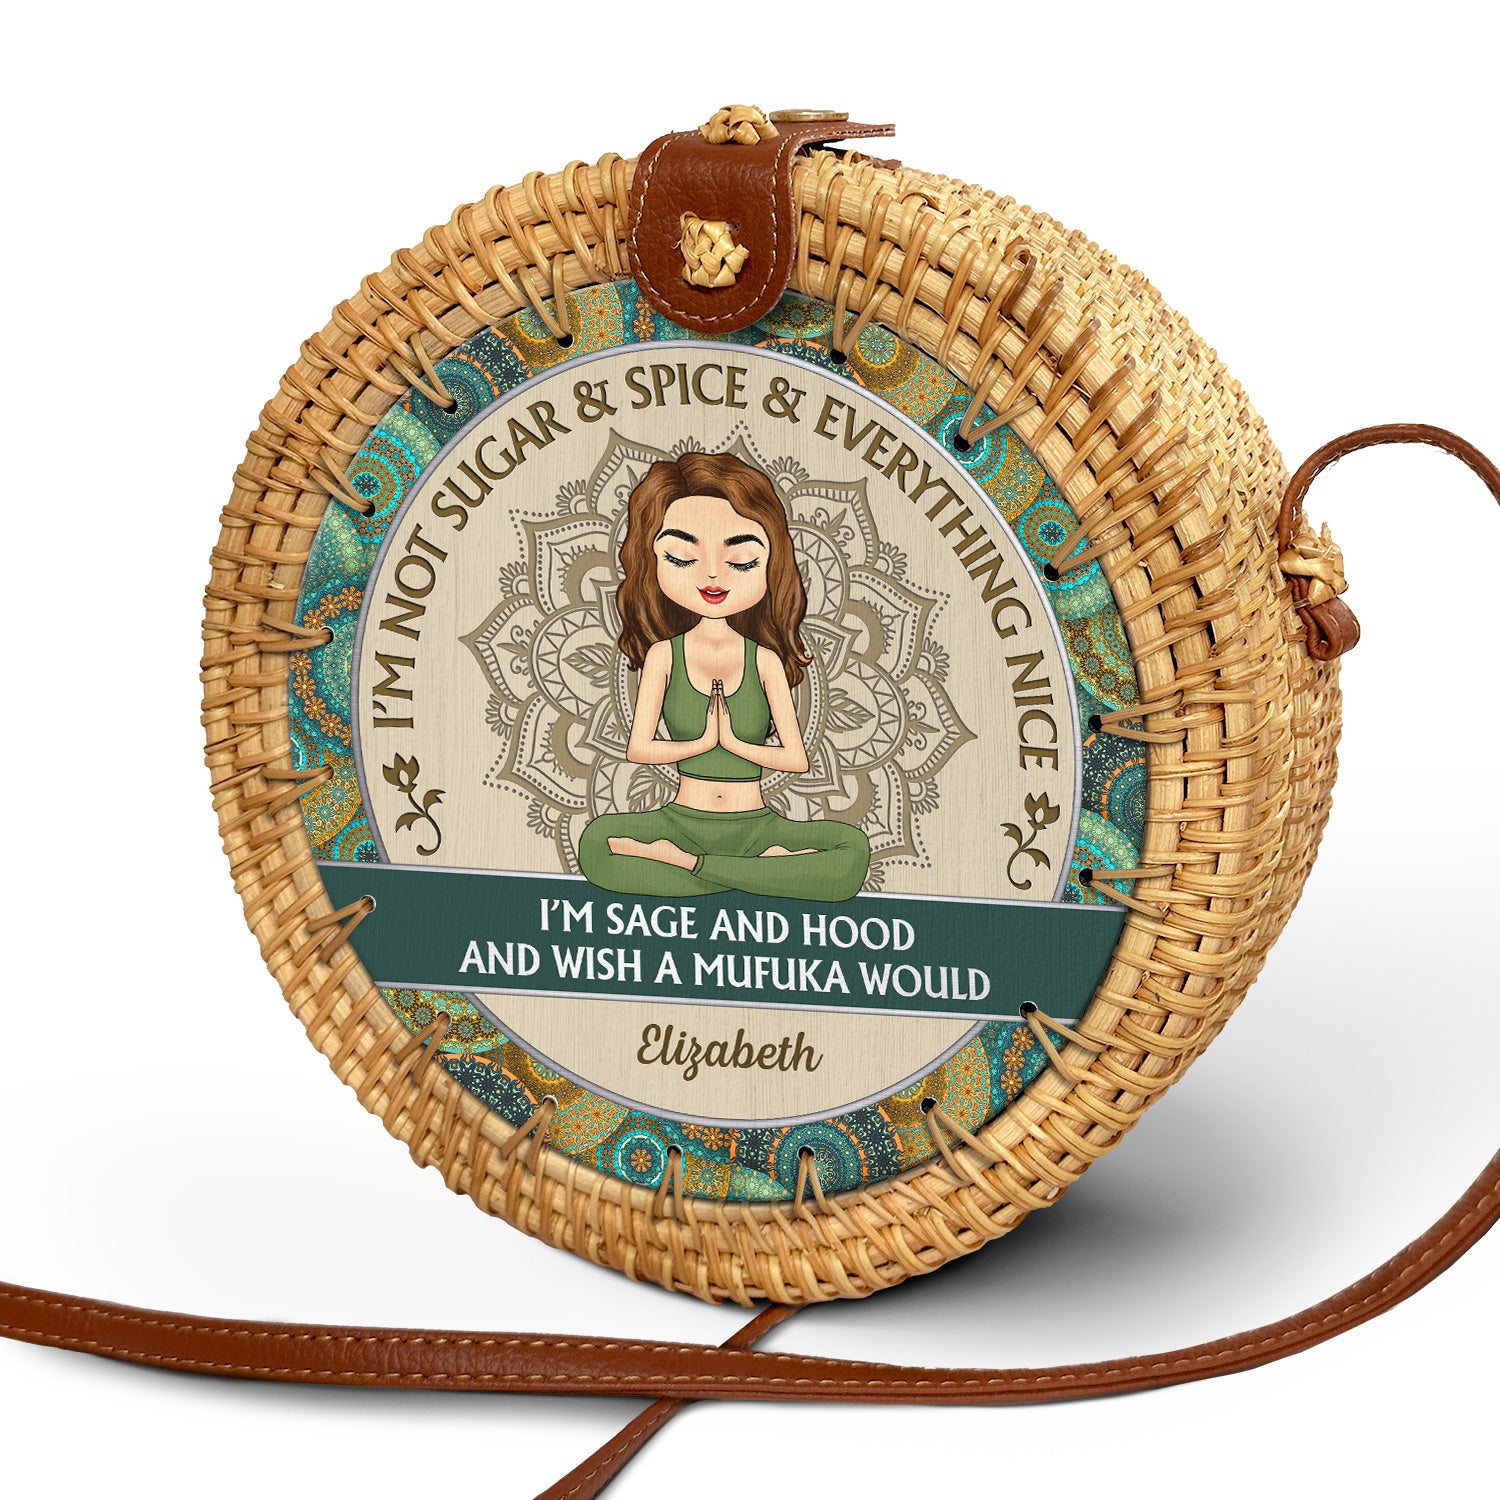 I'm Not Sugar And Spice And Everything Nice - Birthday, Loving Gift For Yourself, Women, Yoga Lovers - Personalized Custom Round Rattan Bag